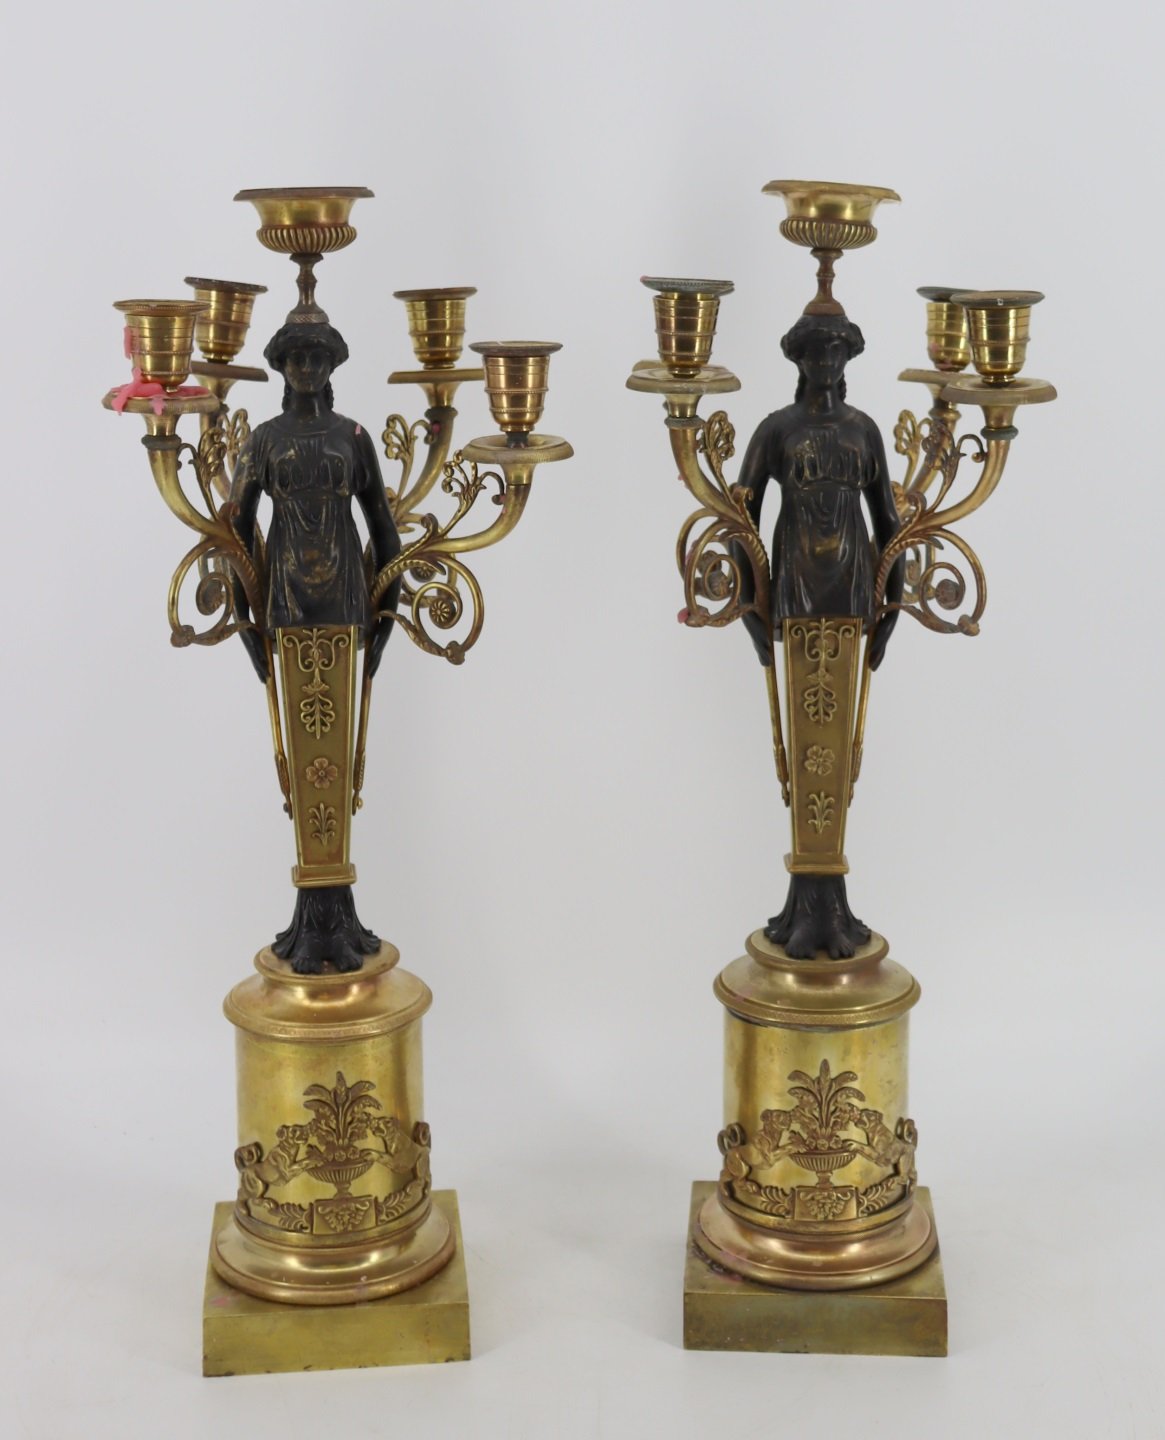 A FINE PAIR OF ANTIQUE GILT & PATINATED